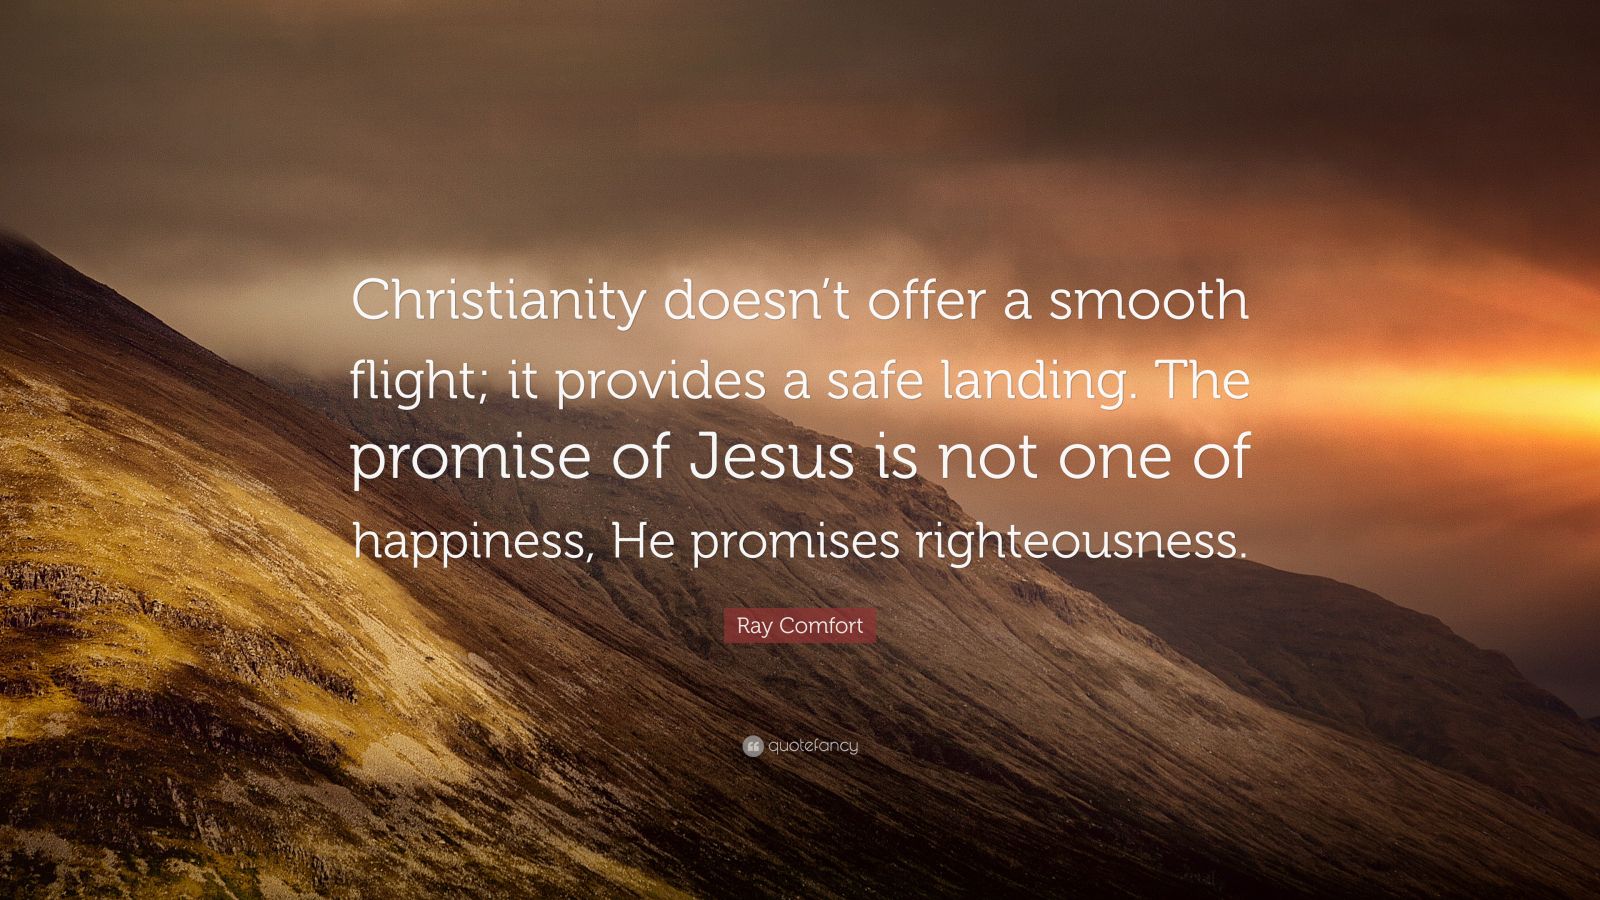 Ray Comfort Quote: “Christianity doesn't offer a smooth flight; it